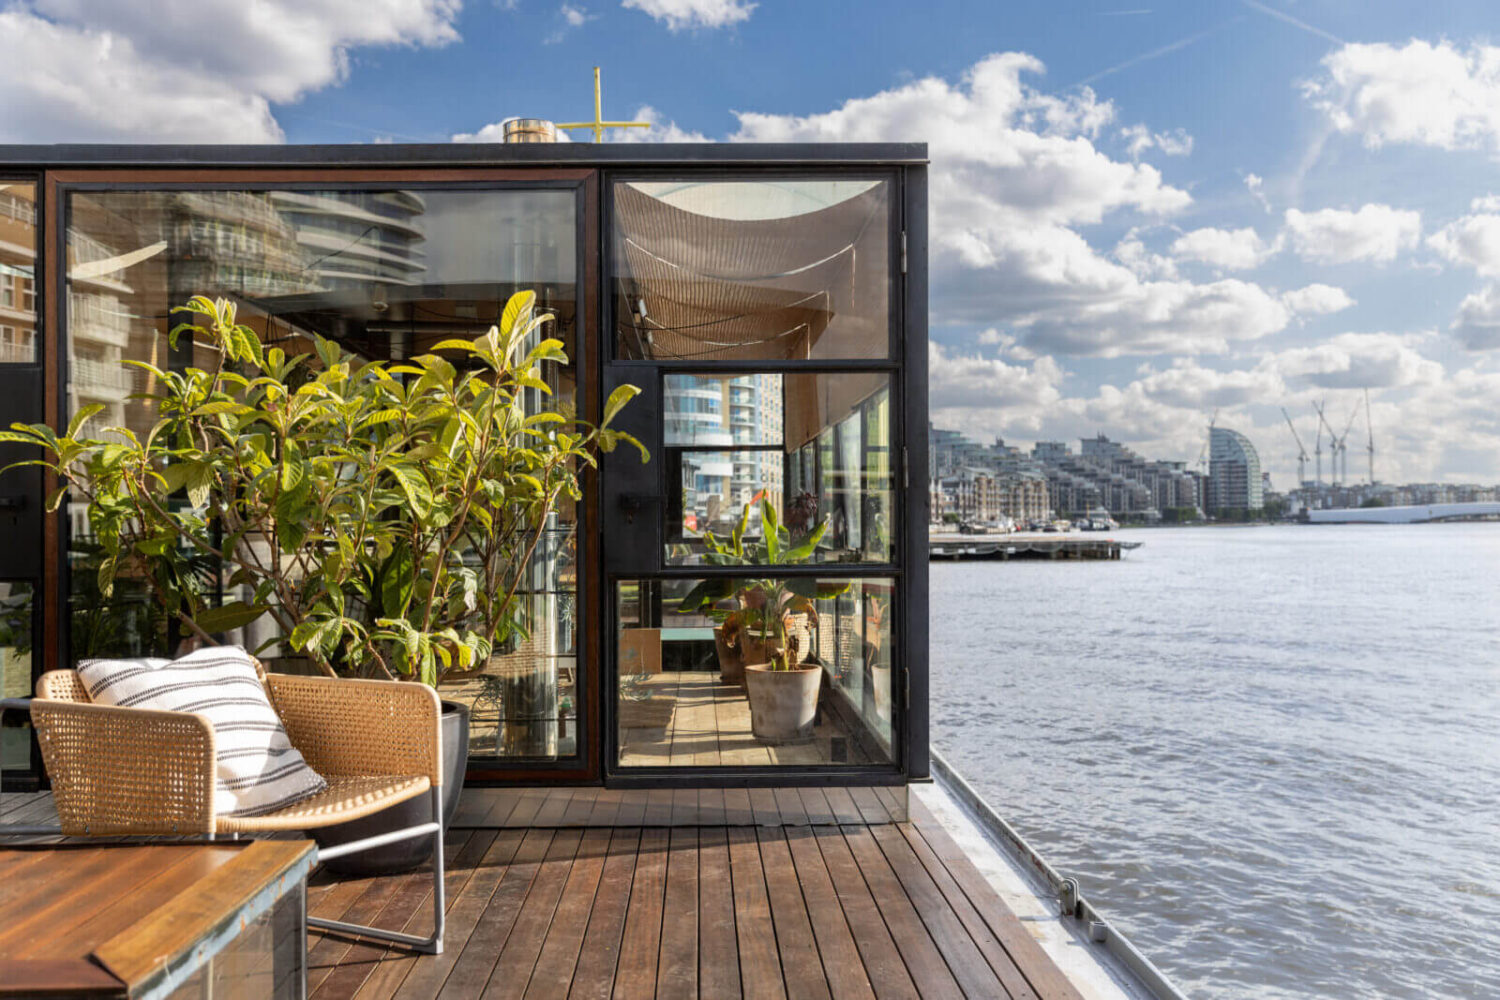 steel-glass-extension-deck-houseboat-london-nordroom